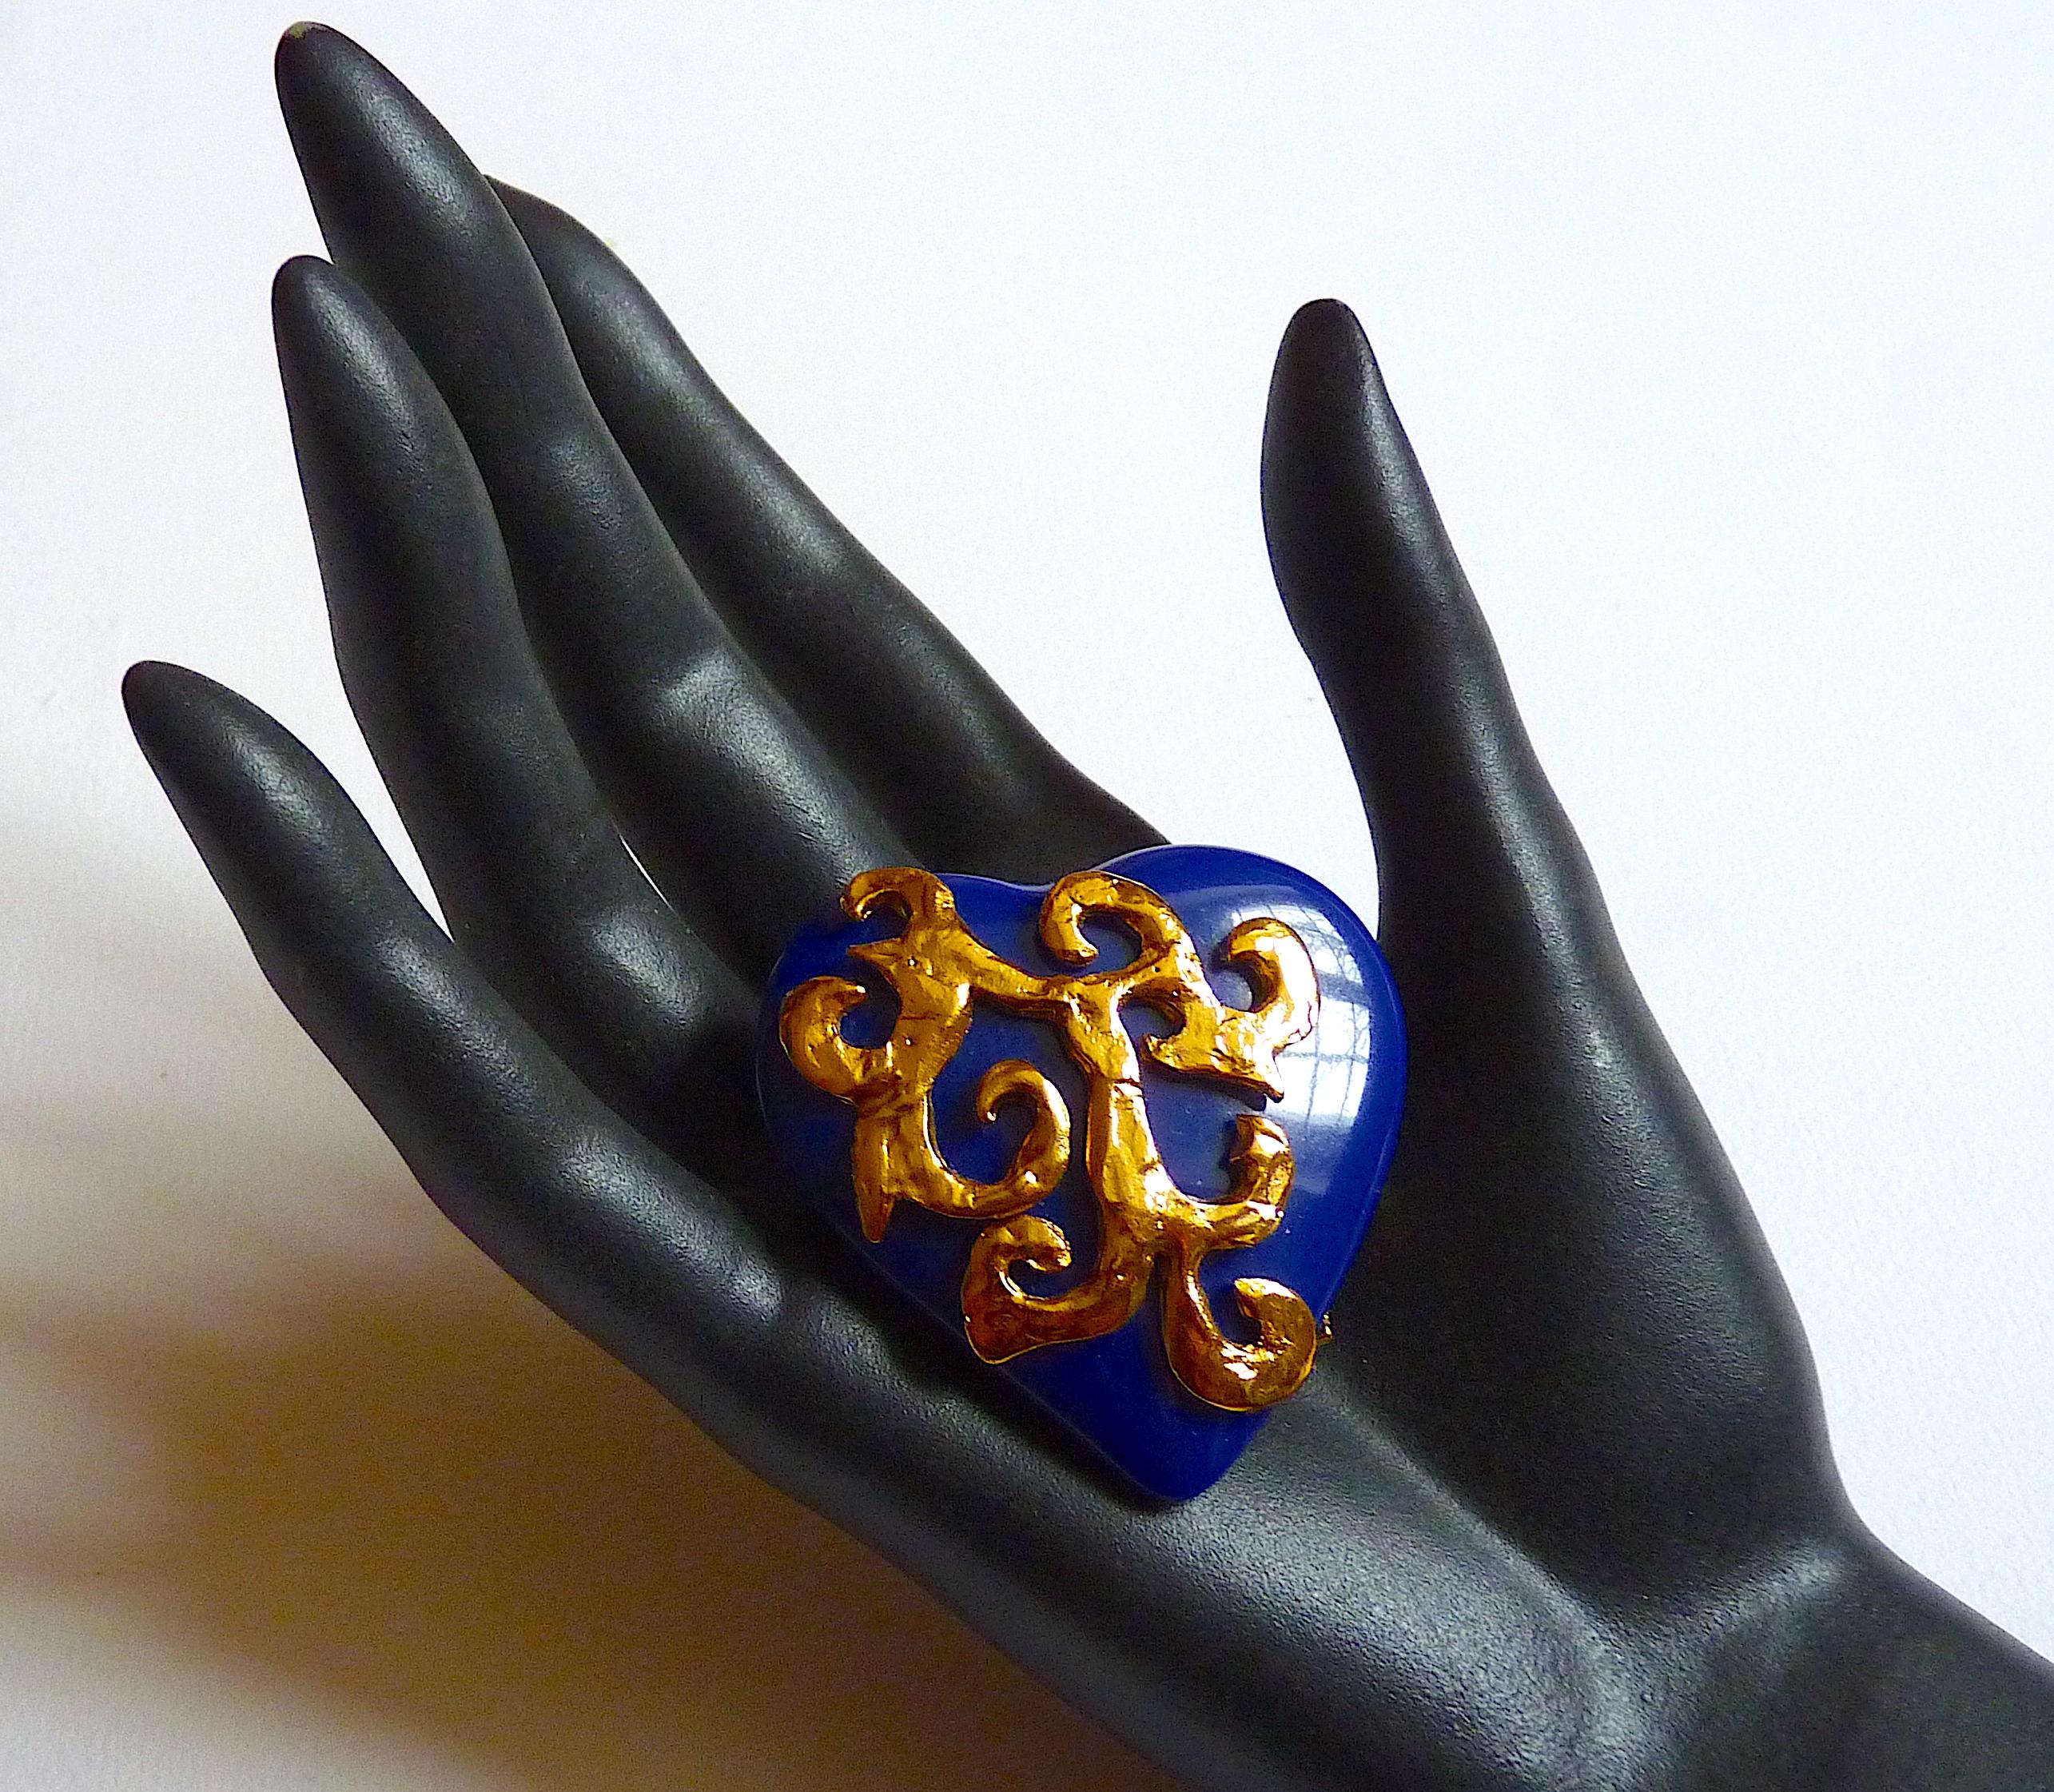 This is a YSL Heart Brooch designed by R. Goossens in blue lucite and gold tone metal, Vintage from the 1980s. Can be worn as a pendant too (gold chain necklace not included)

Signed YSL Made in France at back with serial Number

CONDITION :